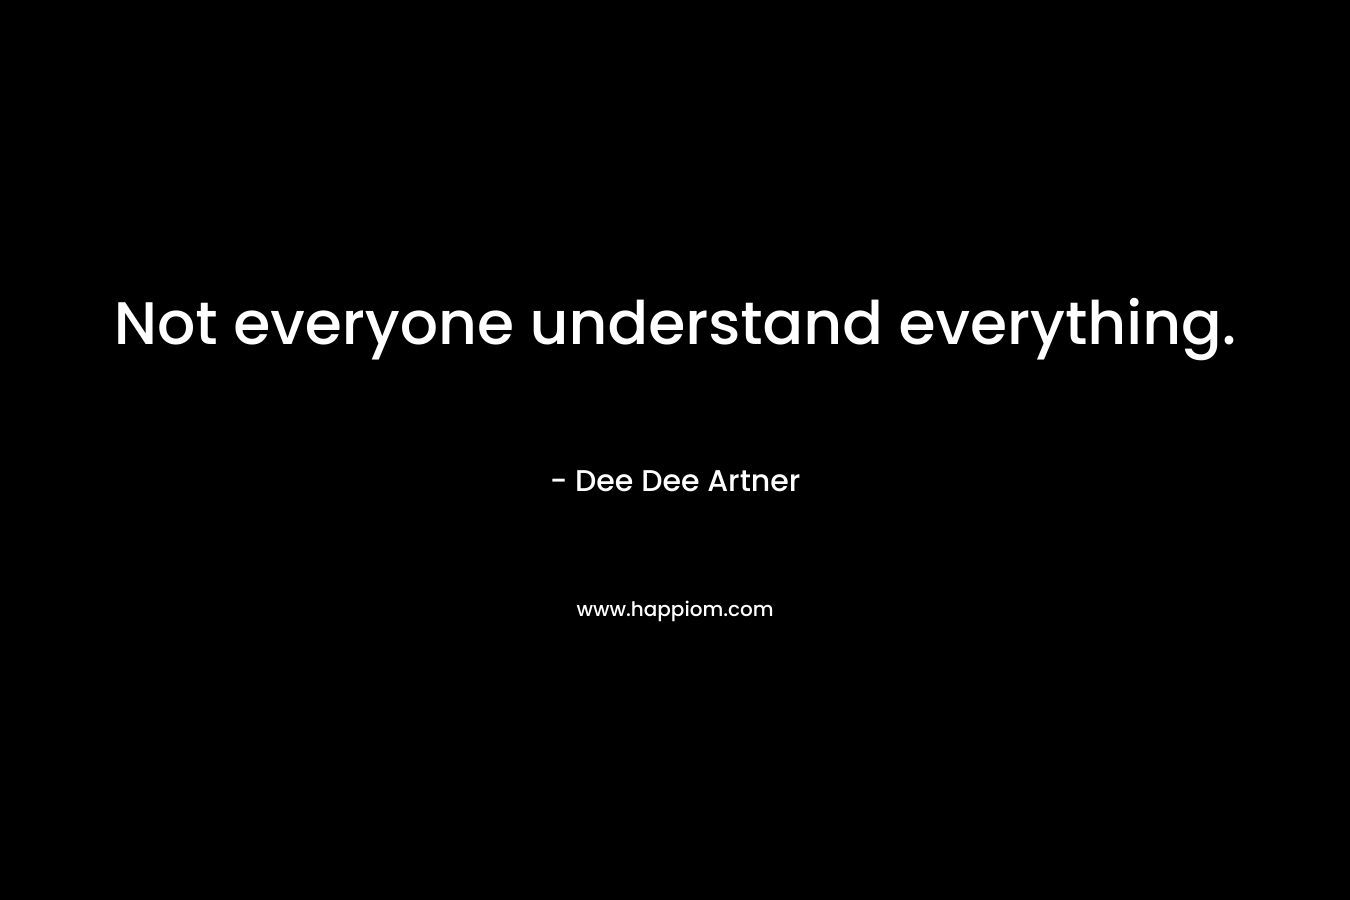 Not everyone understand everything.